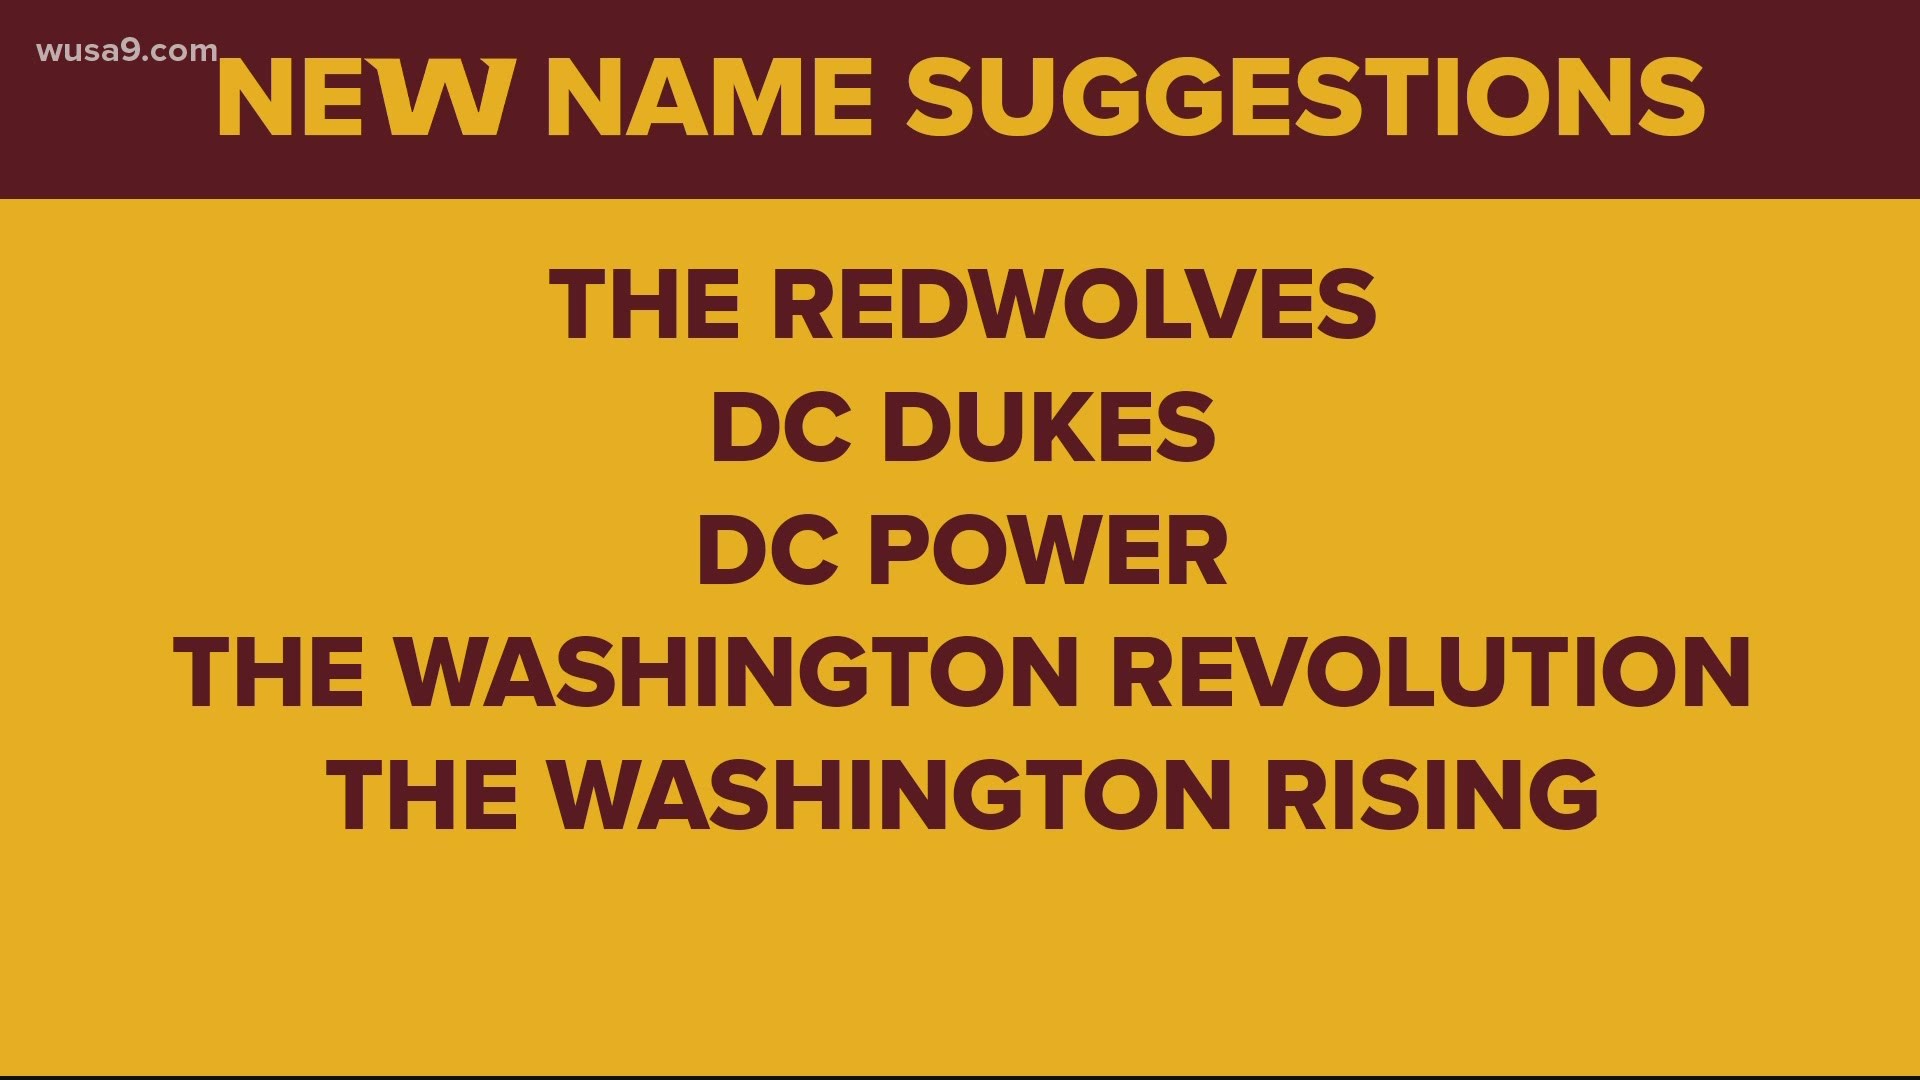 What do you think the Washington Football Team should be renamed?